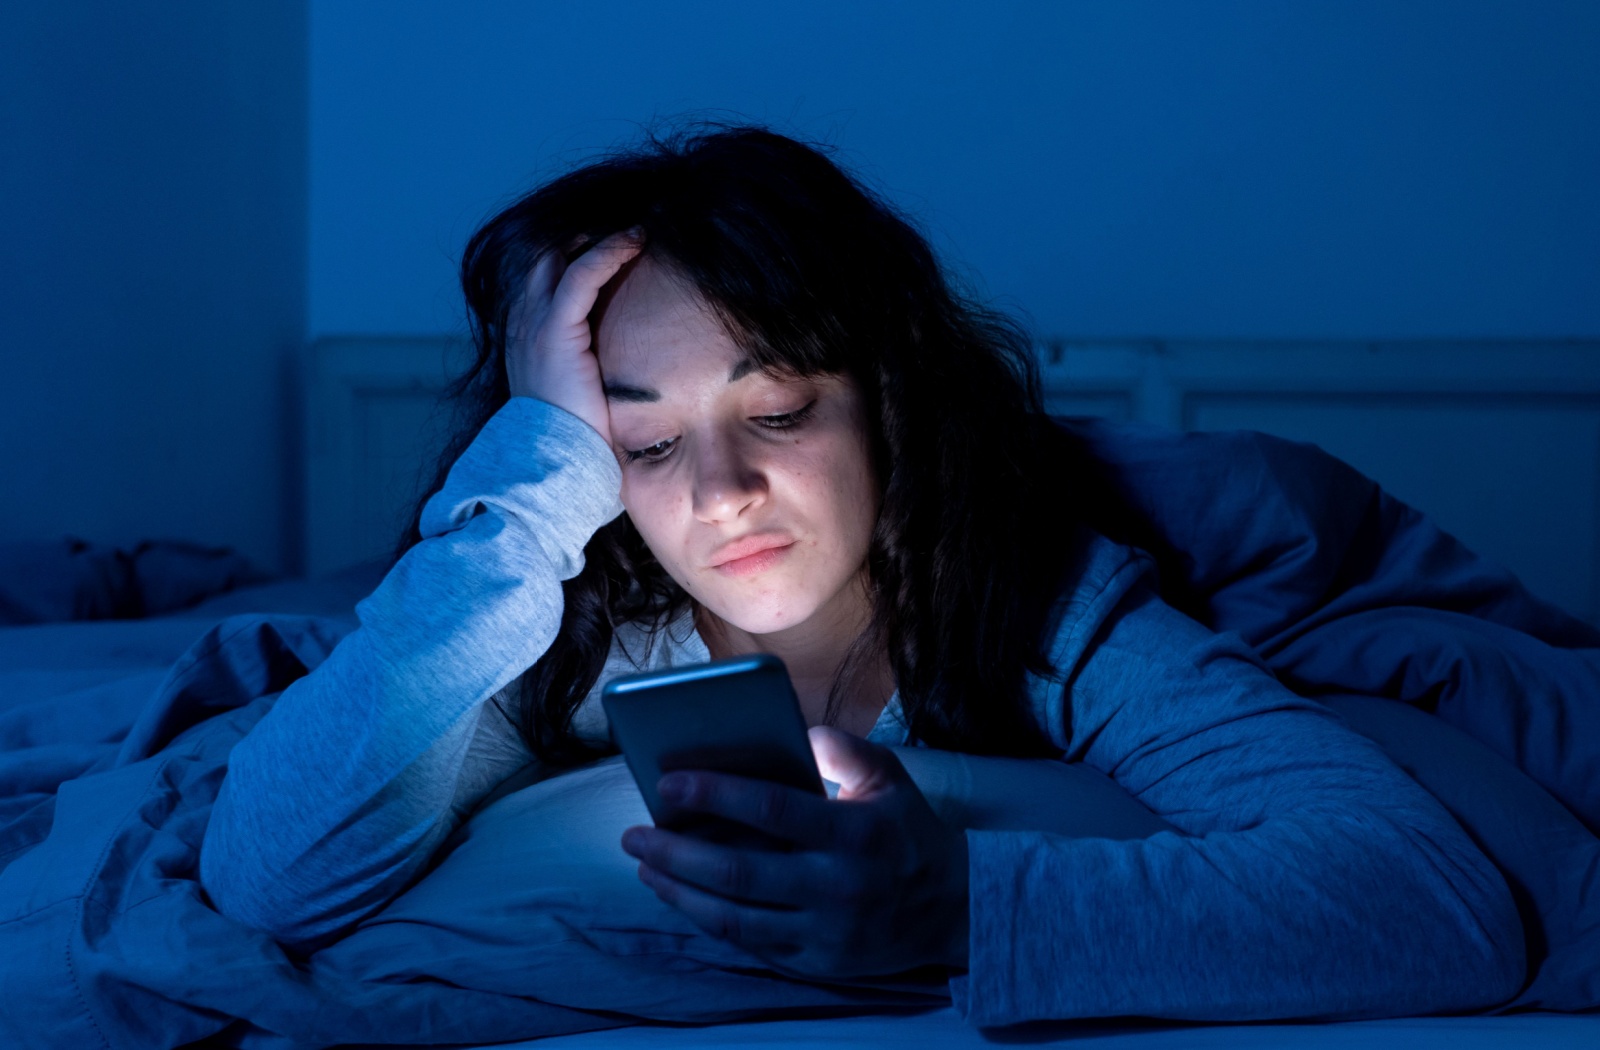 A young woman using her cell phone late at night while lounging in her bed. The LED display lights up her face.